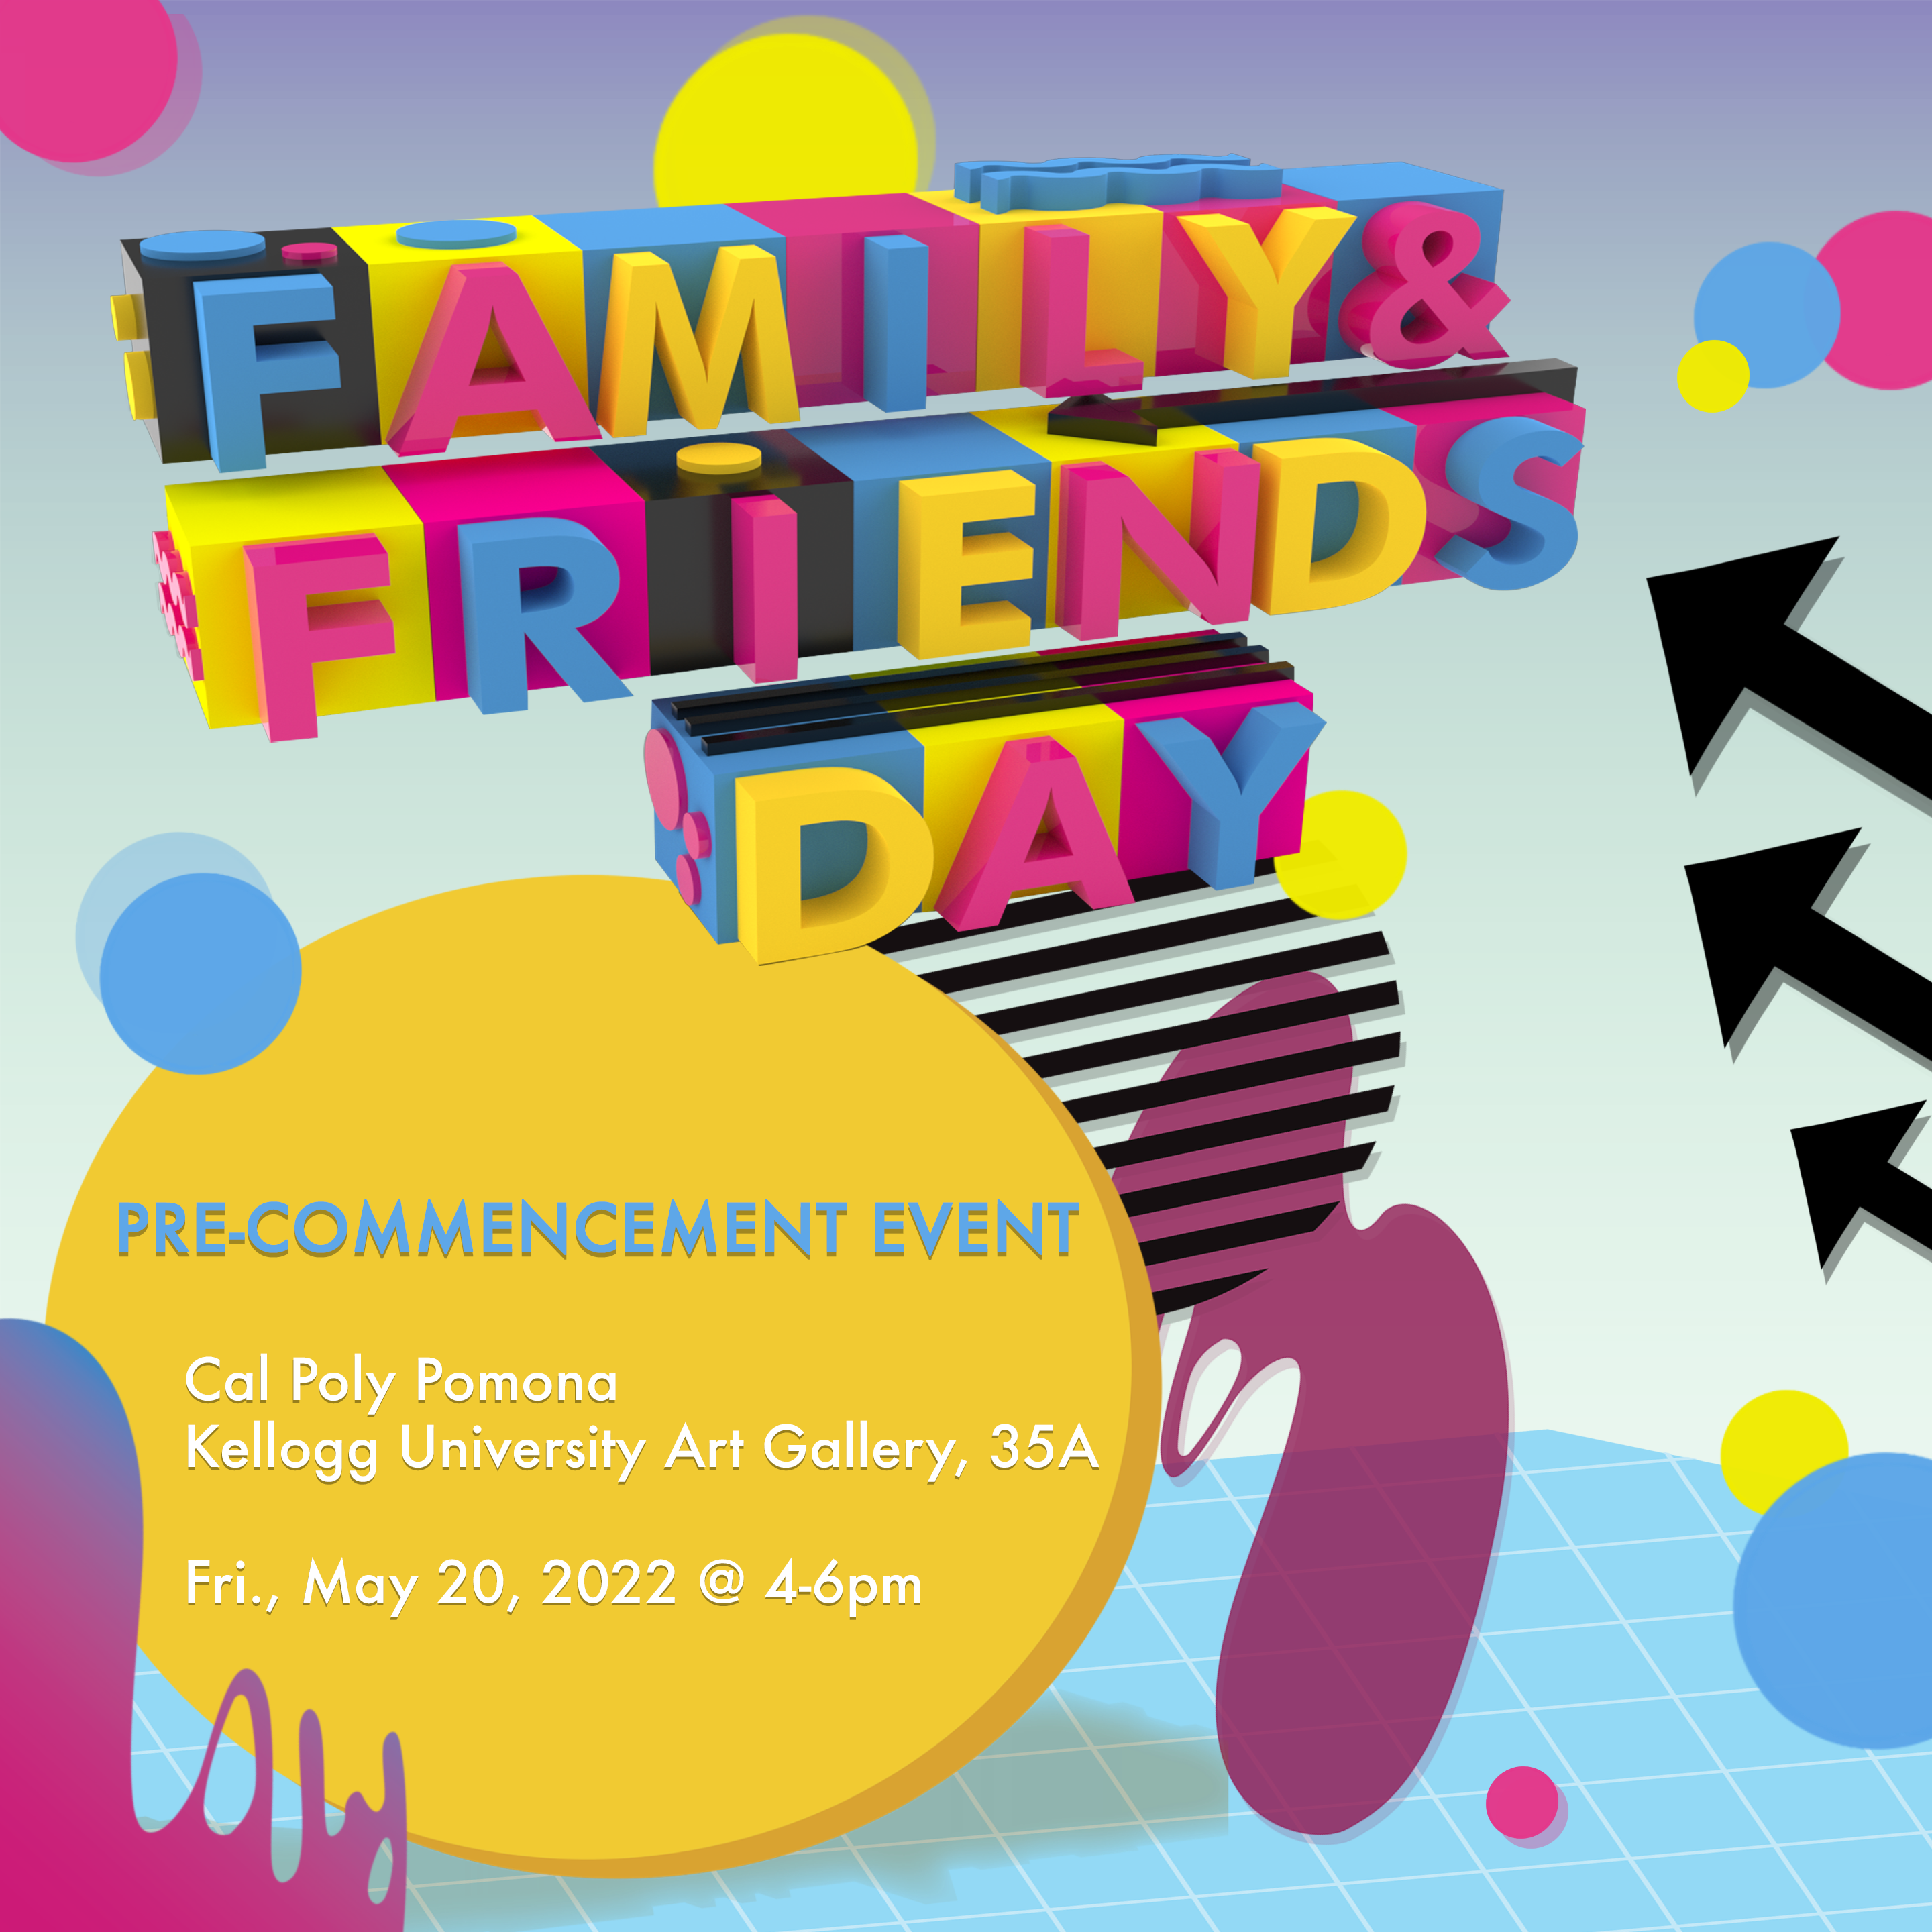 Family & Friends Day (pre-commencement event): Friday, May 20, 2022, 4-6pm 